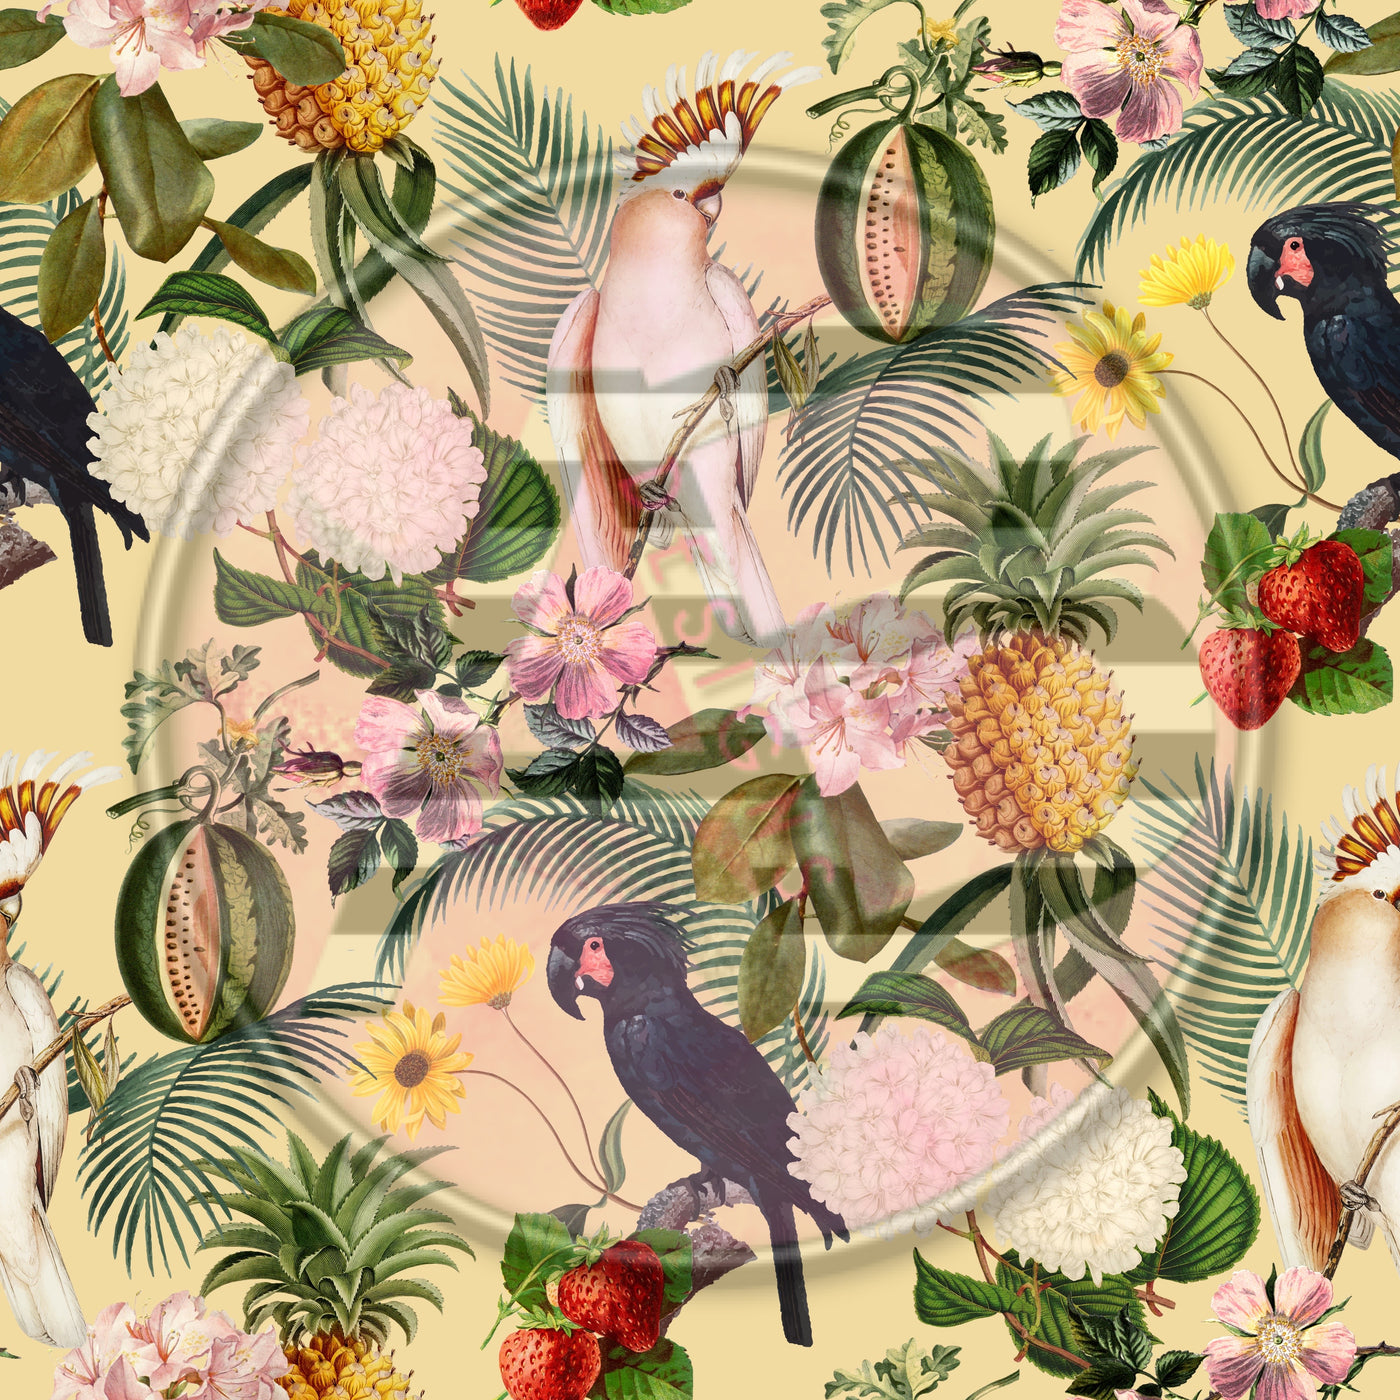 Adhesive Patterned Vinyl - Tropical 1774